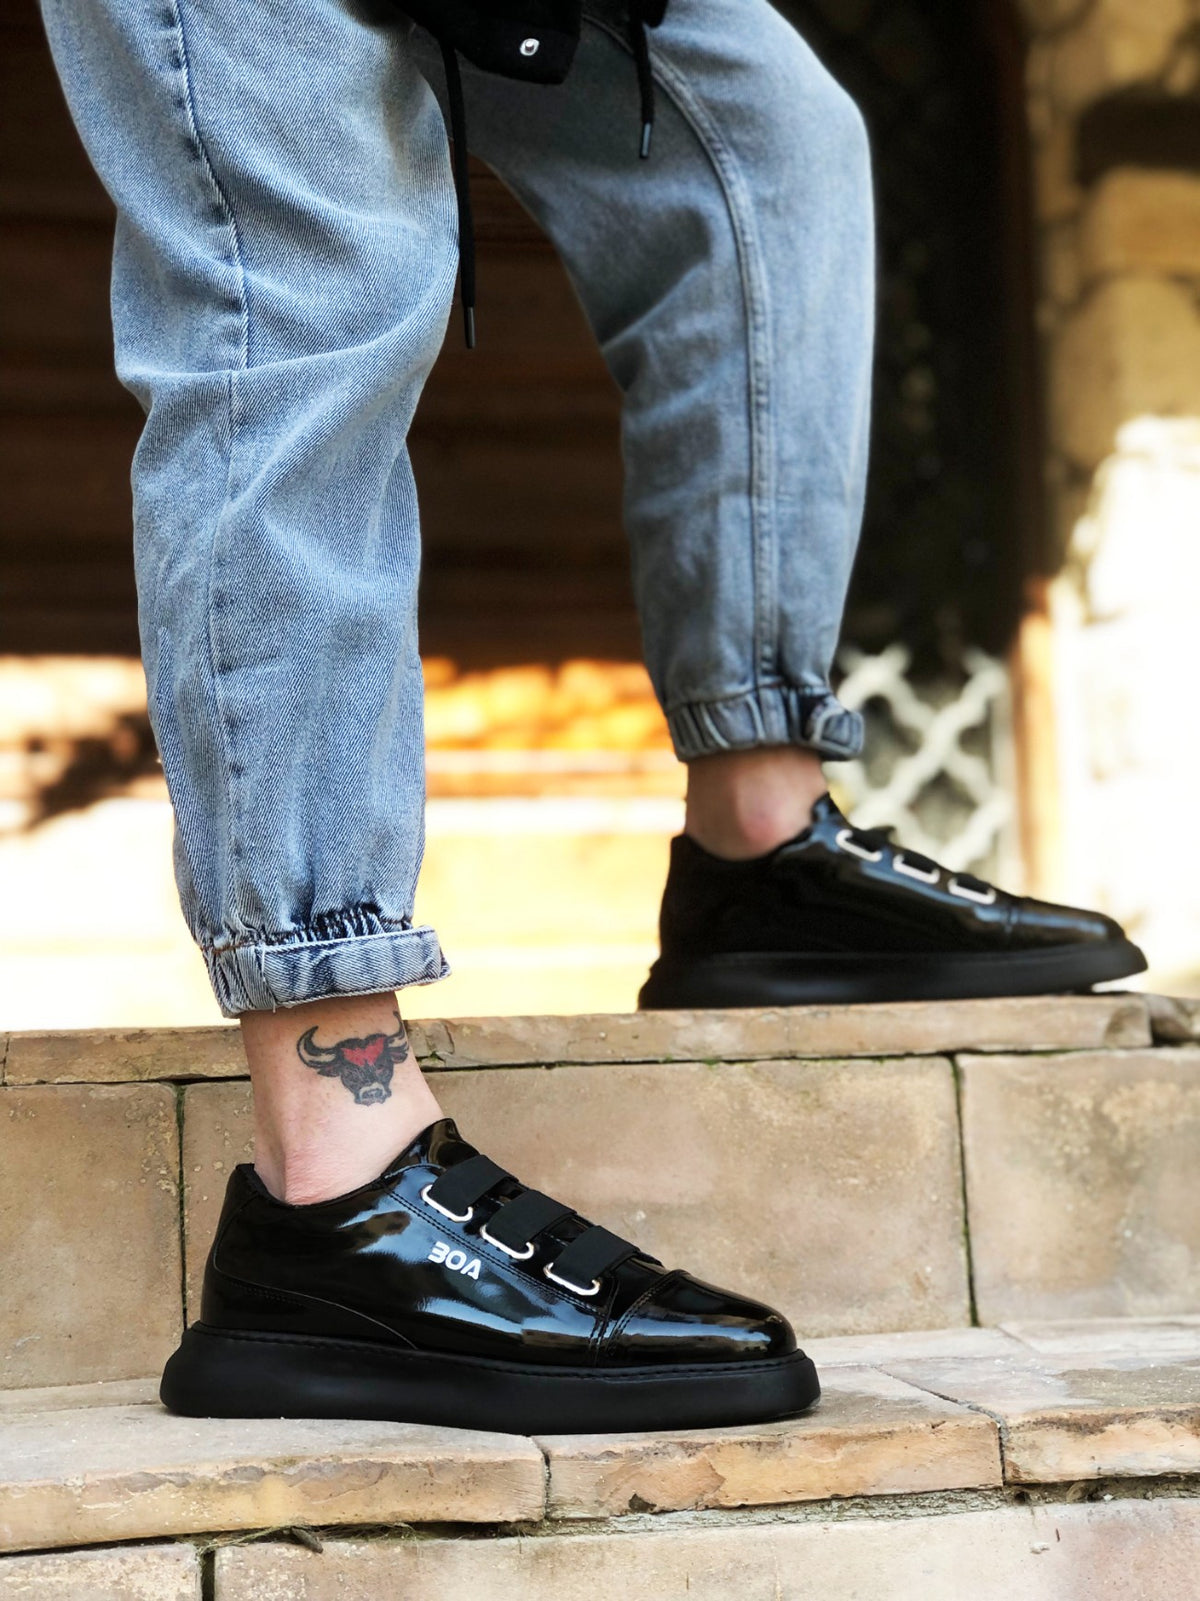 BA0329 3-Stripes Black Patent Leather Thick Sole Casual Men's Shoes - STREETMODE ™